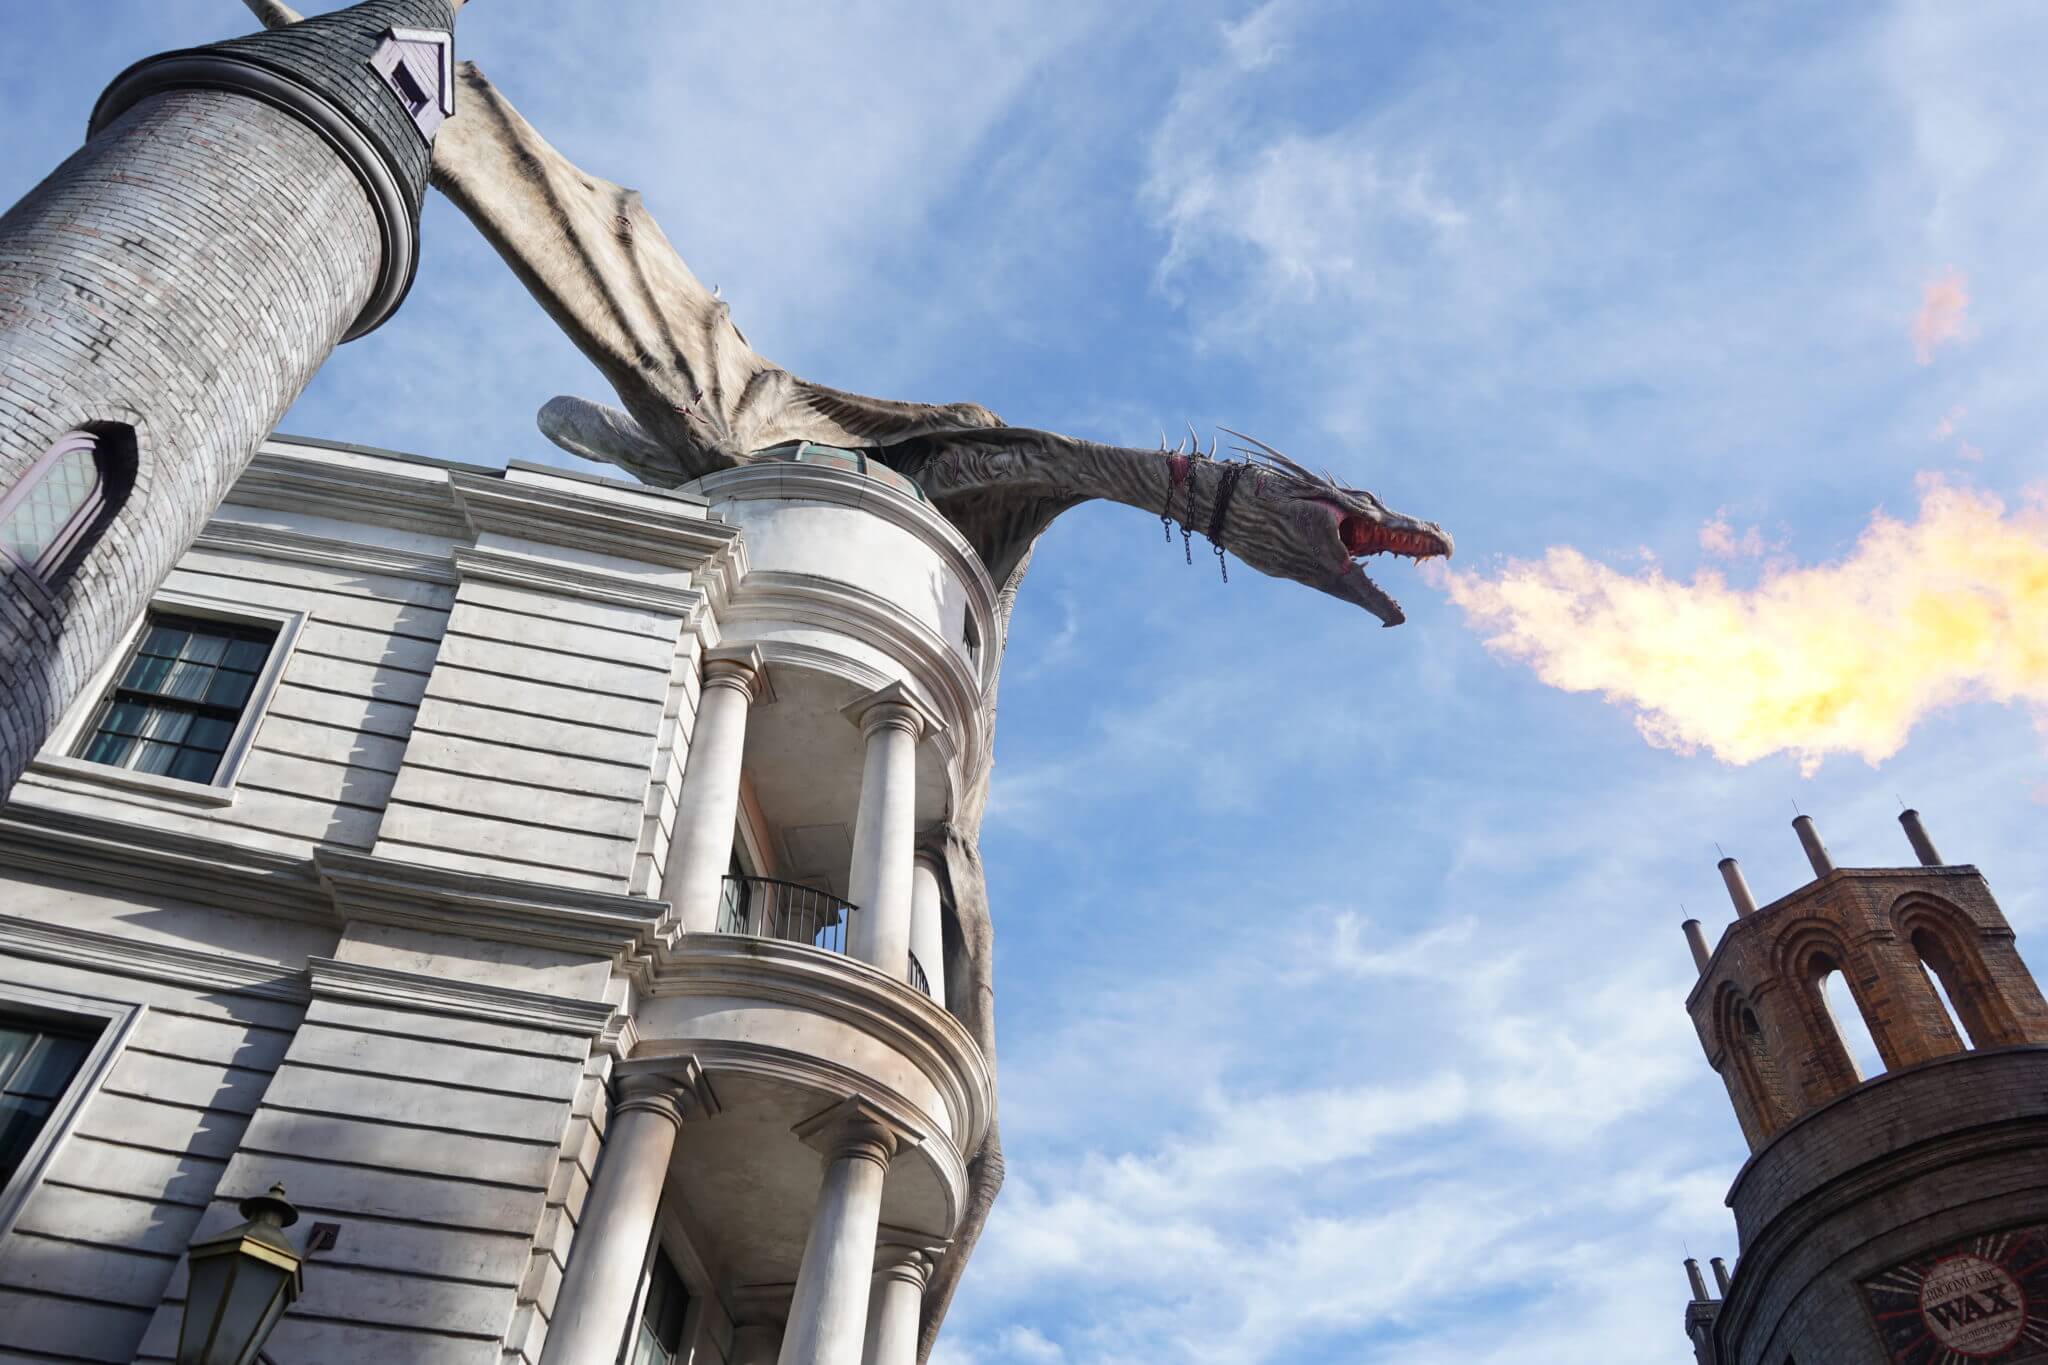 12 Things to Do at Universal Studios Orlando for Adults